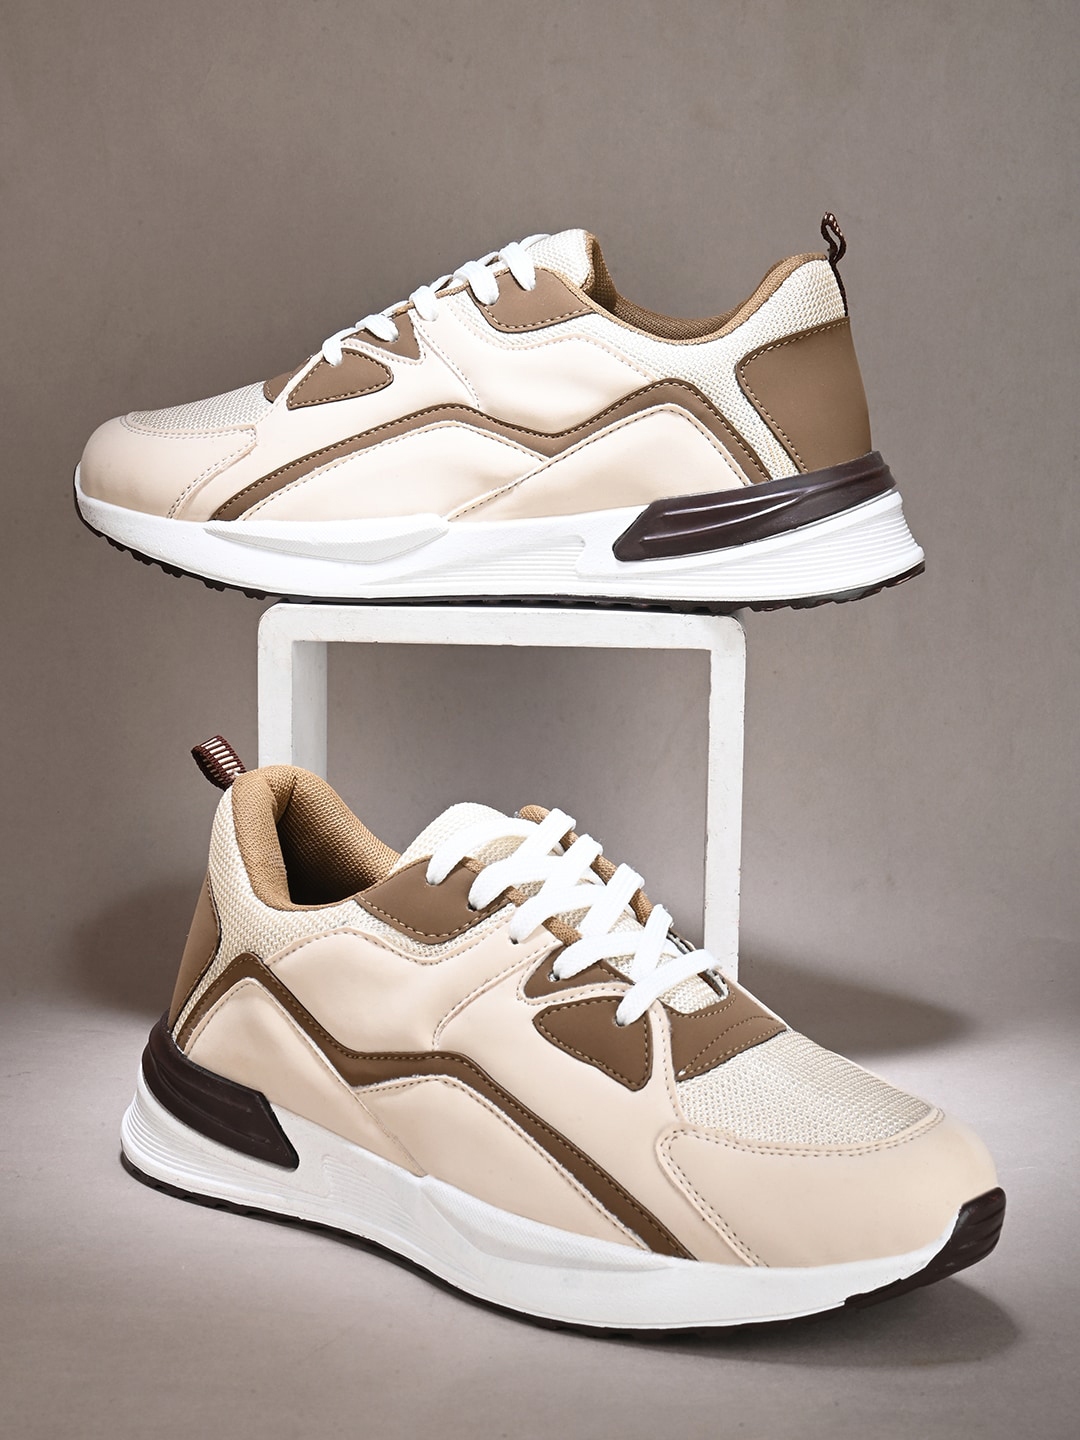 Buy The Roadster Lifestyle Co. Men Cream Coloured Textured Comfort ...